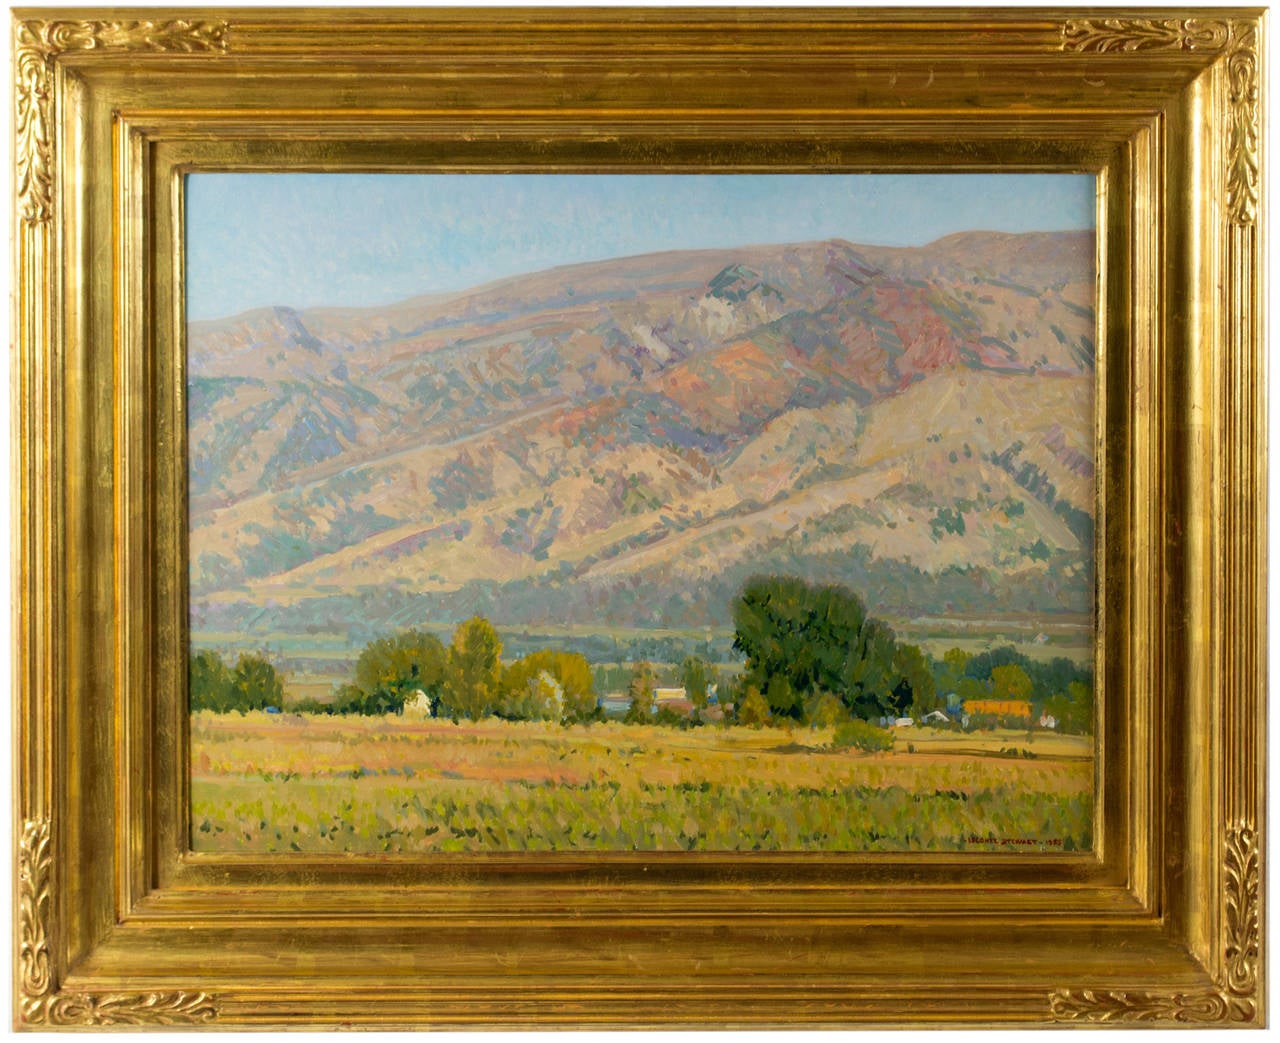 LeConte Stewart Landscape Painting - Early Autumn in the Wasatch Mountains